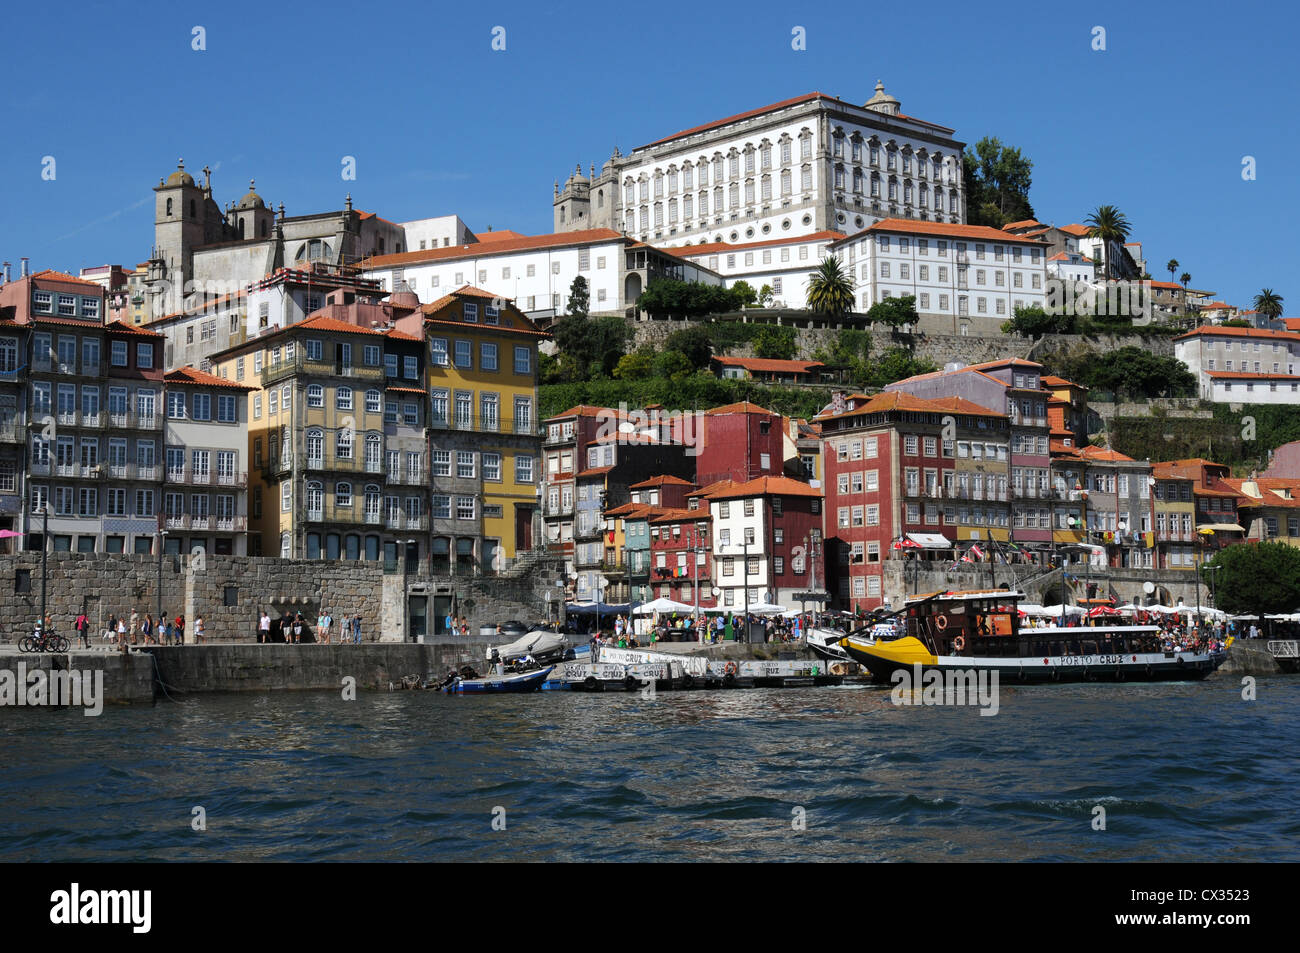 Buildings on the banks of the River Douro, Oporto, Portugal Stock Photo